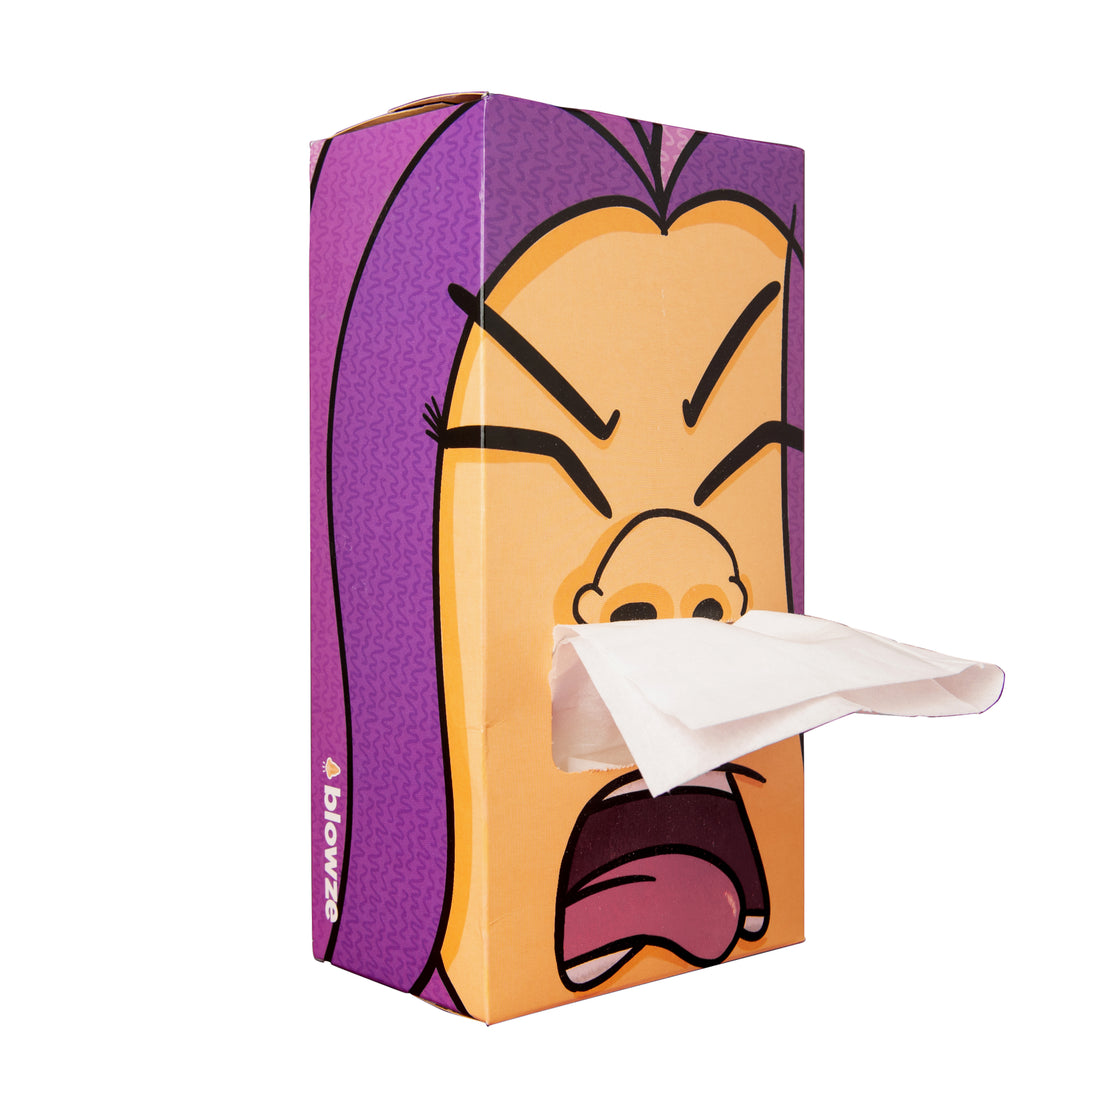 The Purple Sneeze Tissues AntiViral Tissues Hypoallergenic Tissues Soft Tissues Lotion Infused Tissues Large Tissue Boxes Decorative Tissue Boxes Eco Friendly Tissues Sneeze Silencer Healthy Tissues Soothing Tissues Sustainable Tissues Beautiful Tissue Boxes Clean Tissues Hygienic Tissues Gentle Tissues Moisturizing Tissues Convenient Tissues Home Essential Family Size Tissues